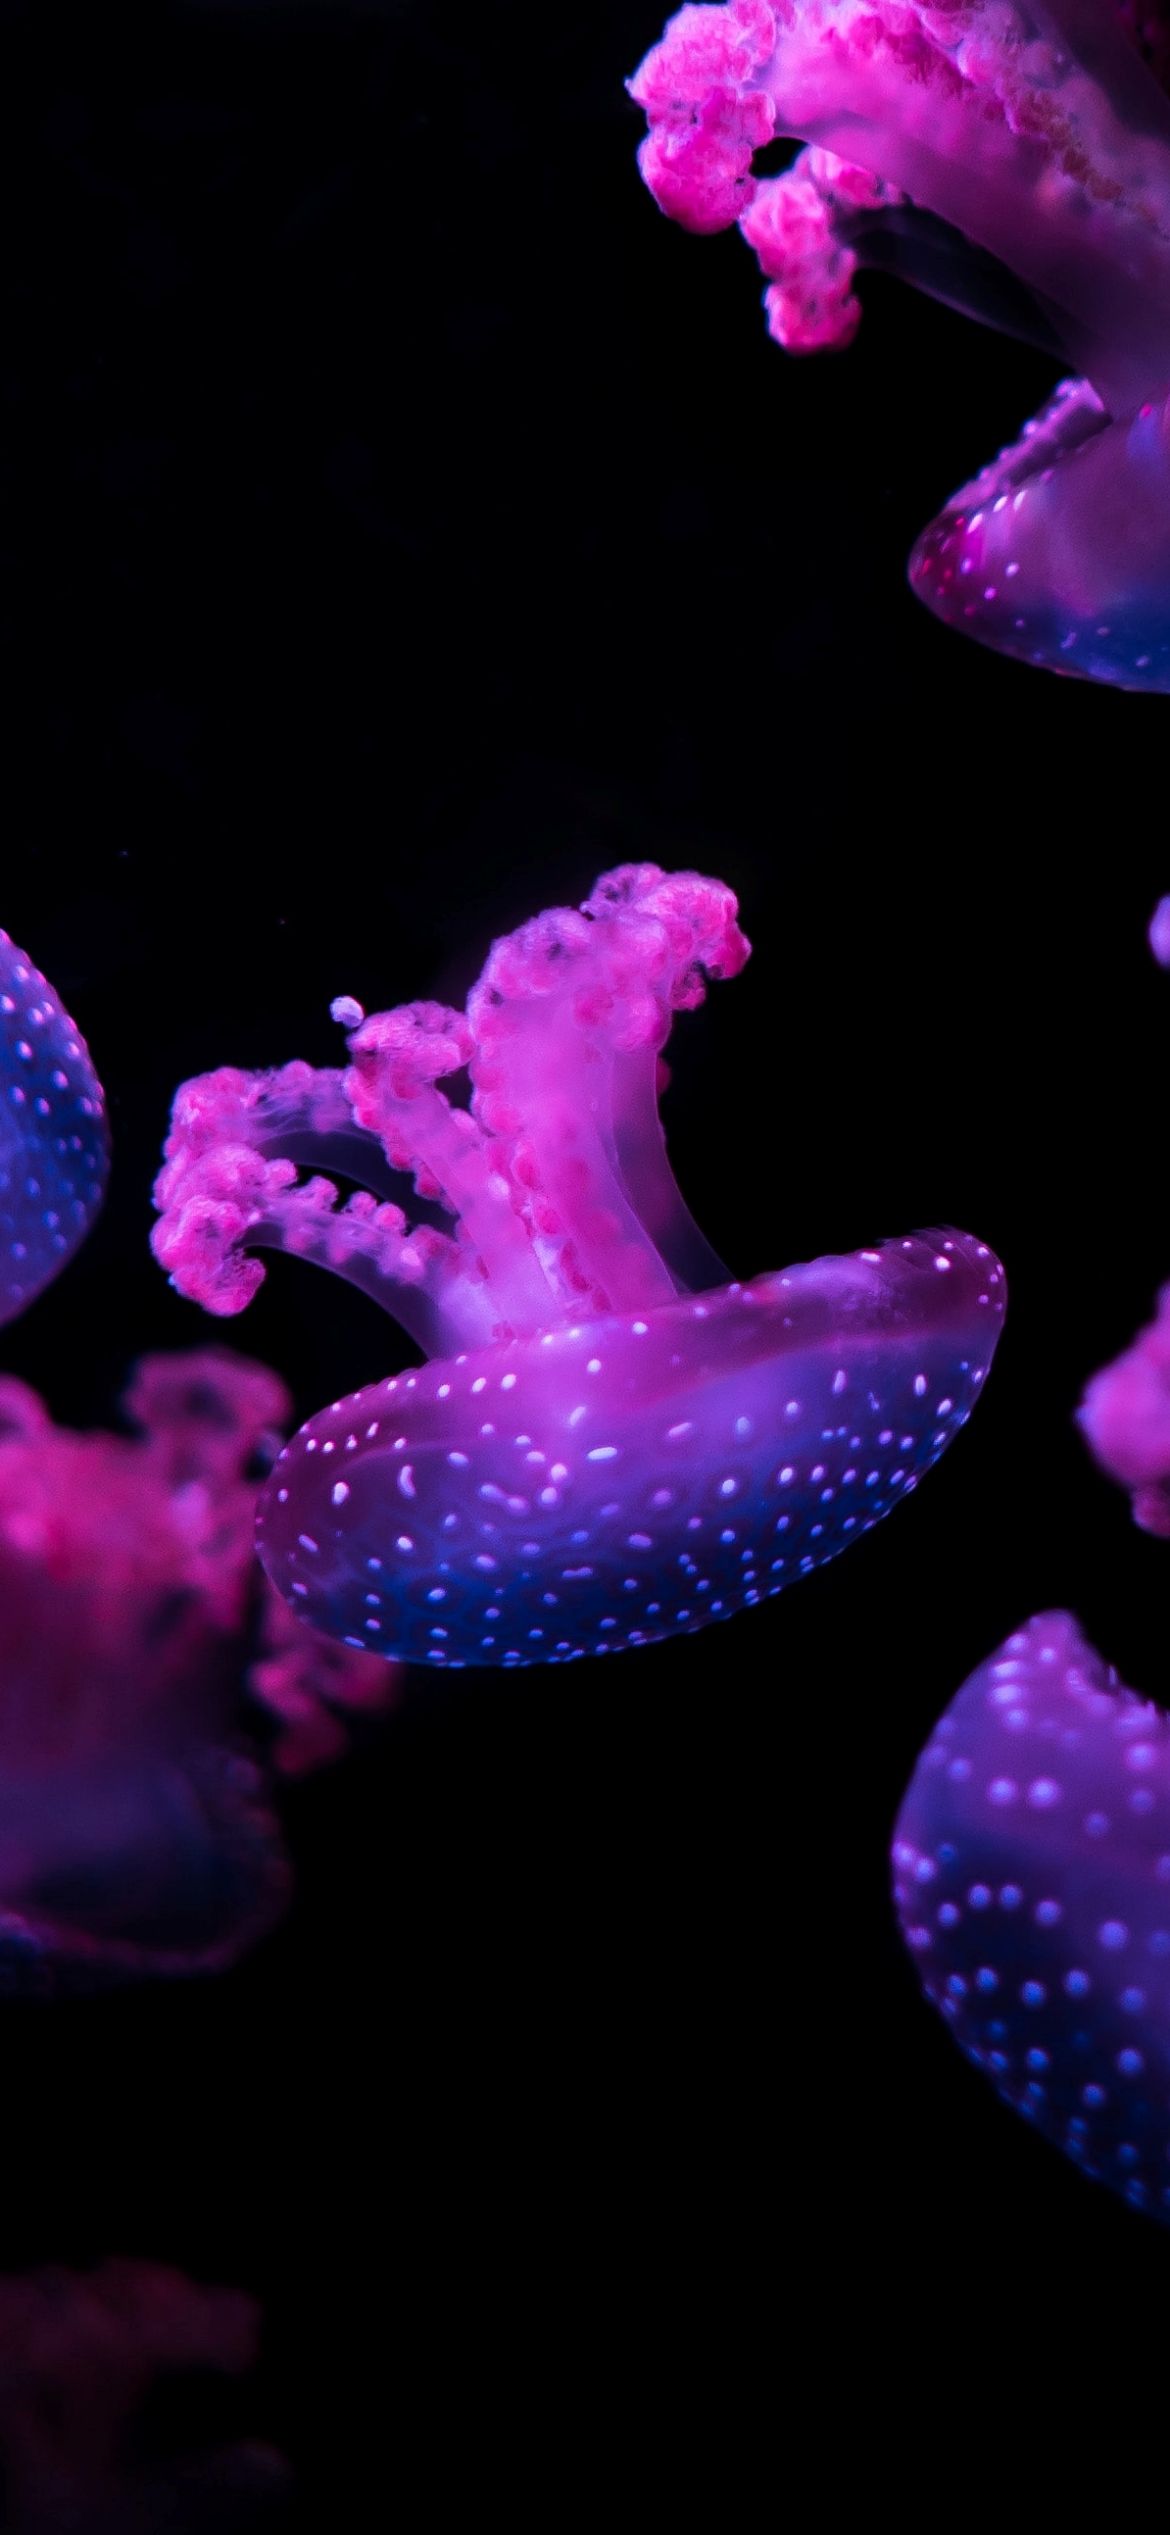 A jellyfish with purple and pink tentacles floating in the water. - Underwater, water